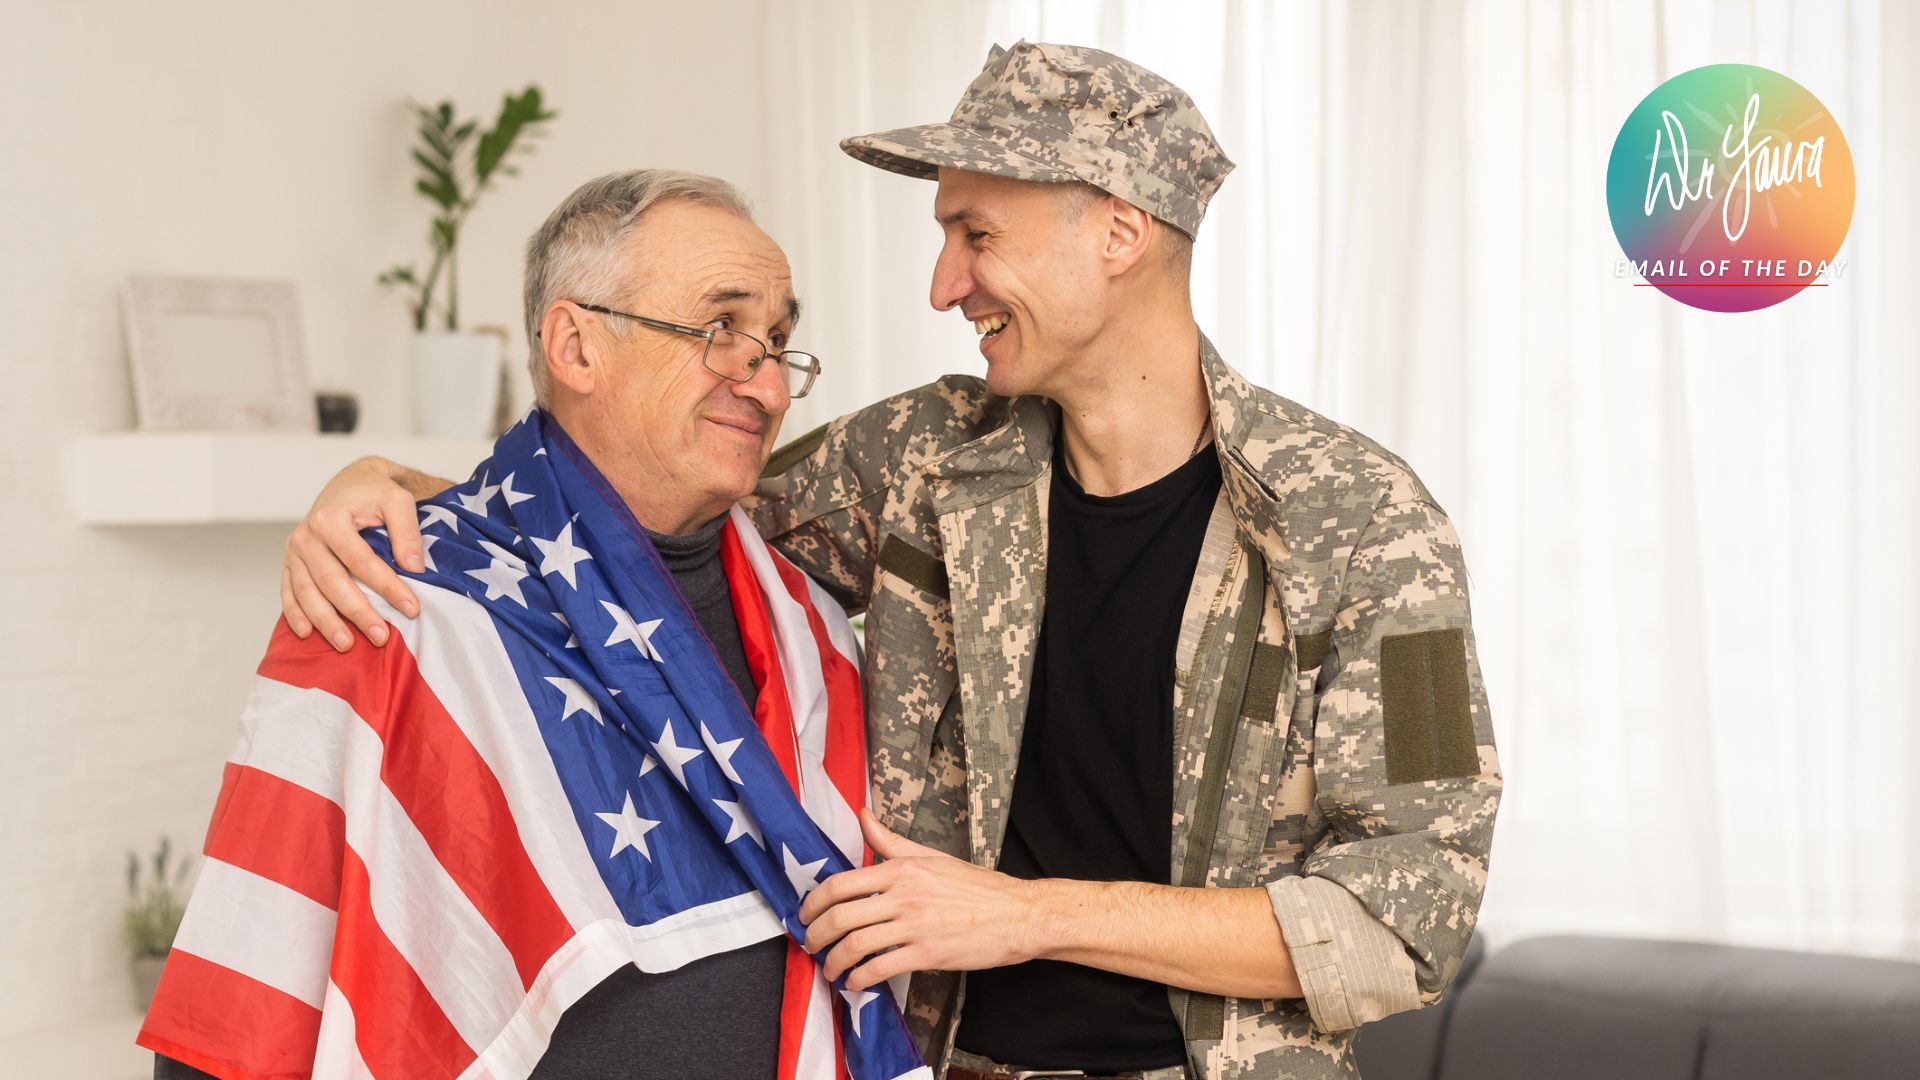 Man in soldier's uniform embraces older man with American flag wrapped around his shoulders